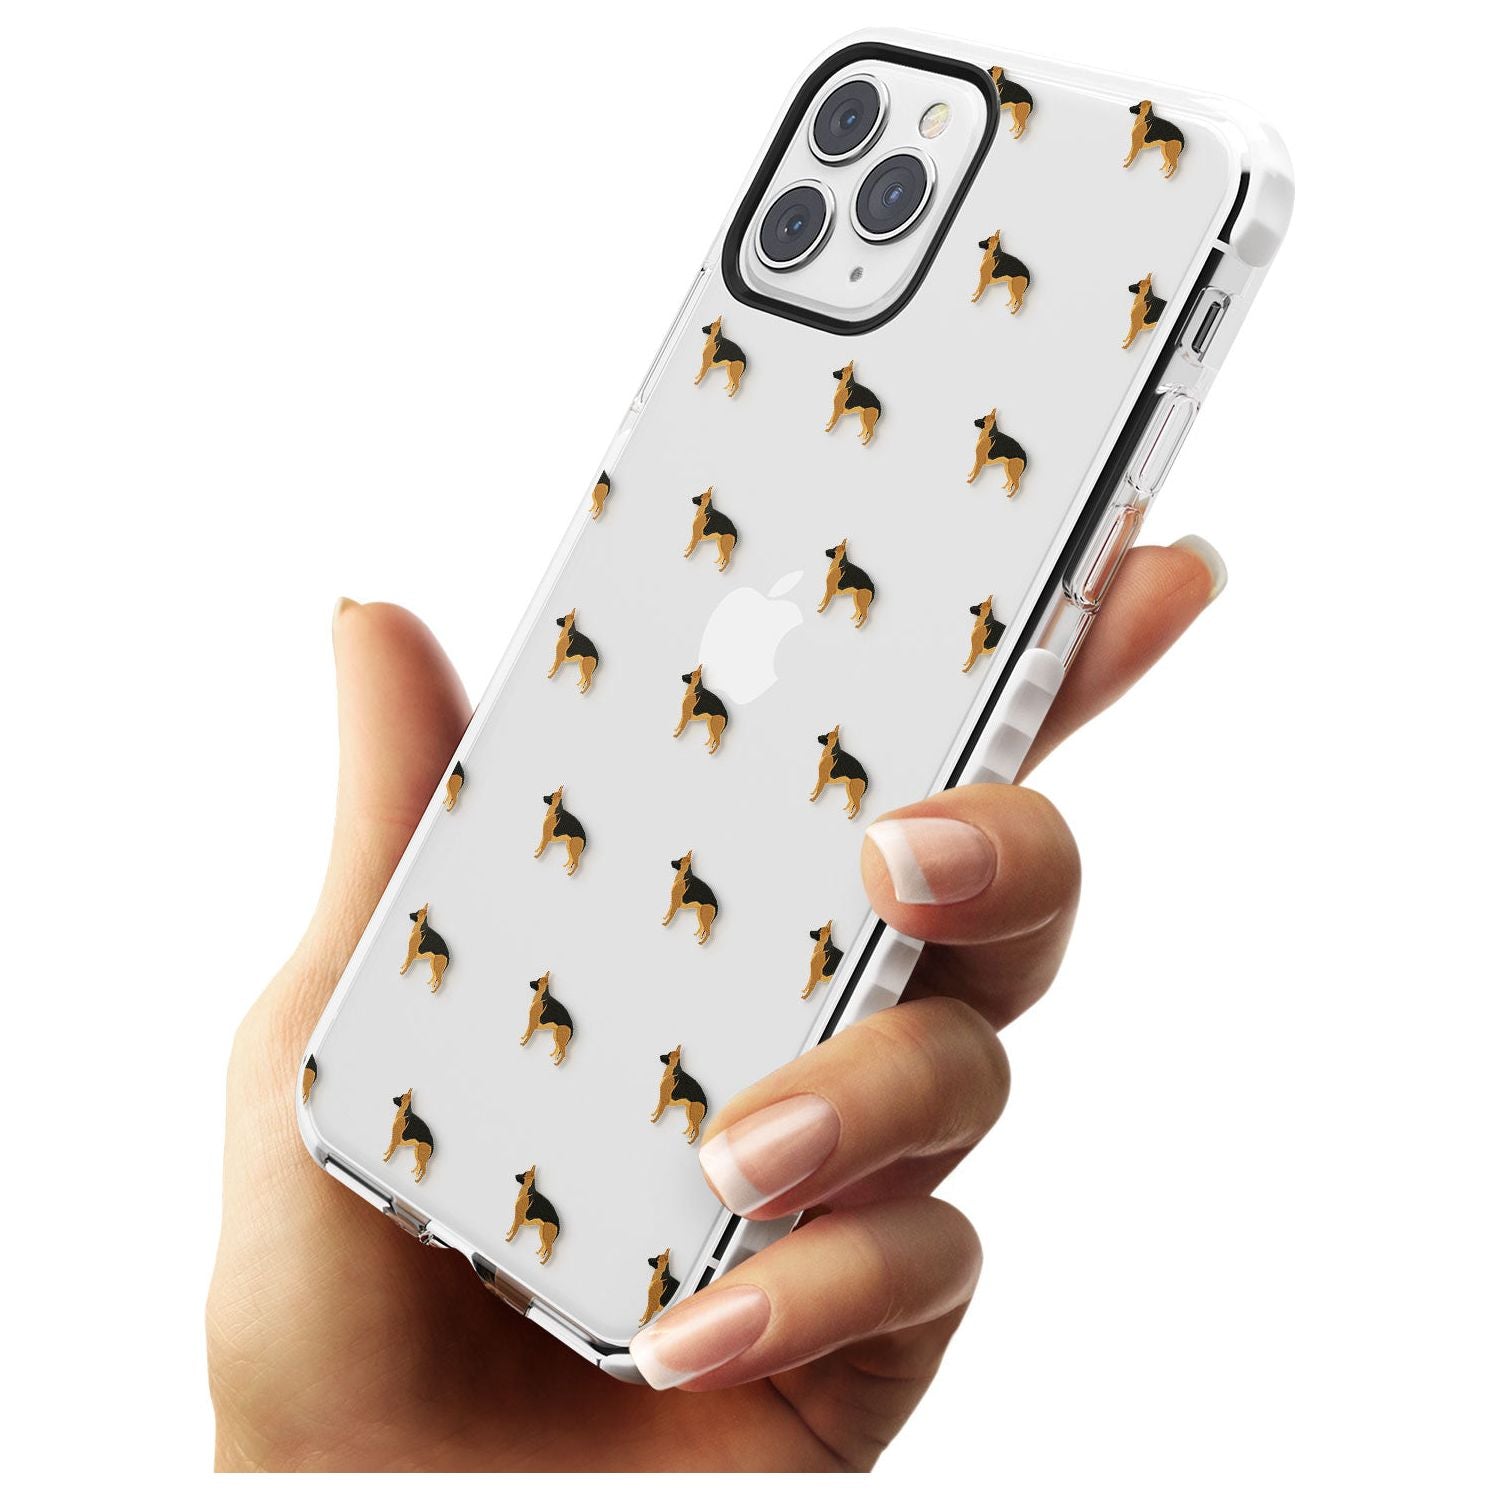 German Sherpard Dog Pattern Clear Impact Phone Case for iPhone 11 Pro Max